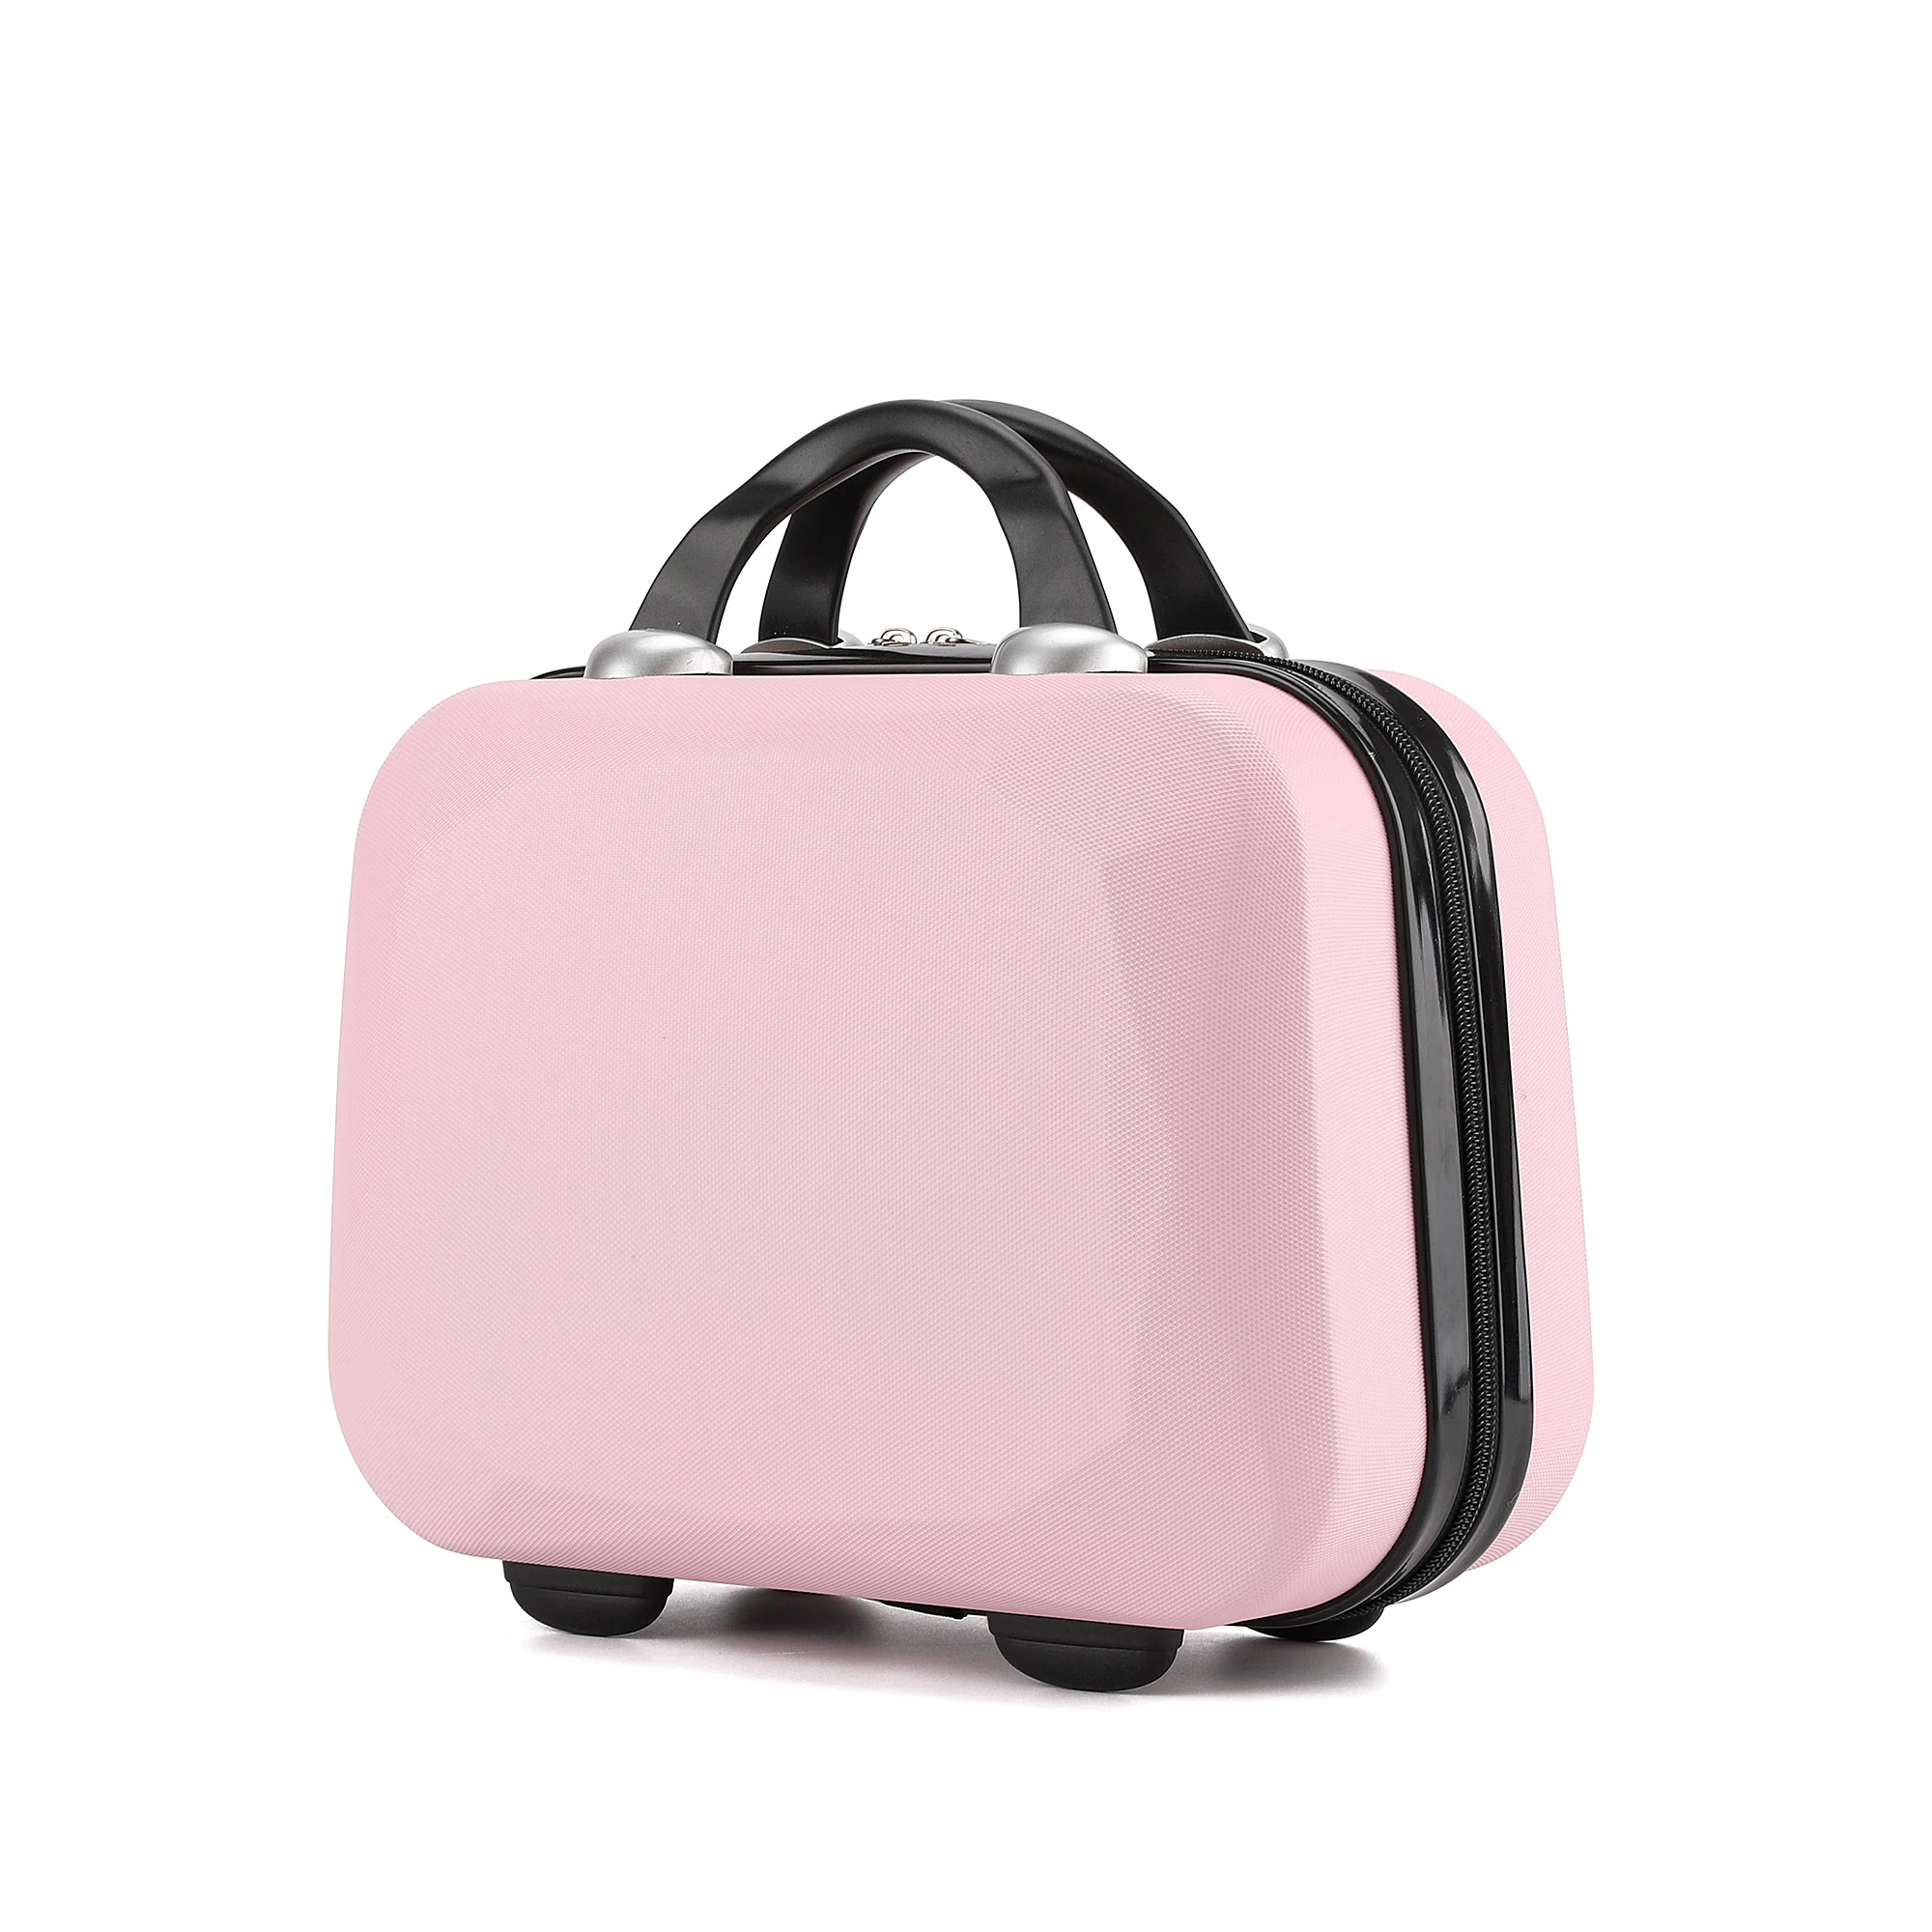 Makeup Travel Case 11 inch Hard Shell Cosmetic Organizer Bag Small Portable  Make up Train Hand Luggage with Elastic Strap ABS Mini Suitcase for Women